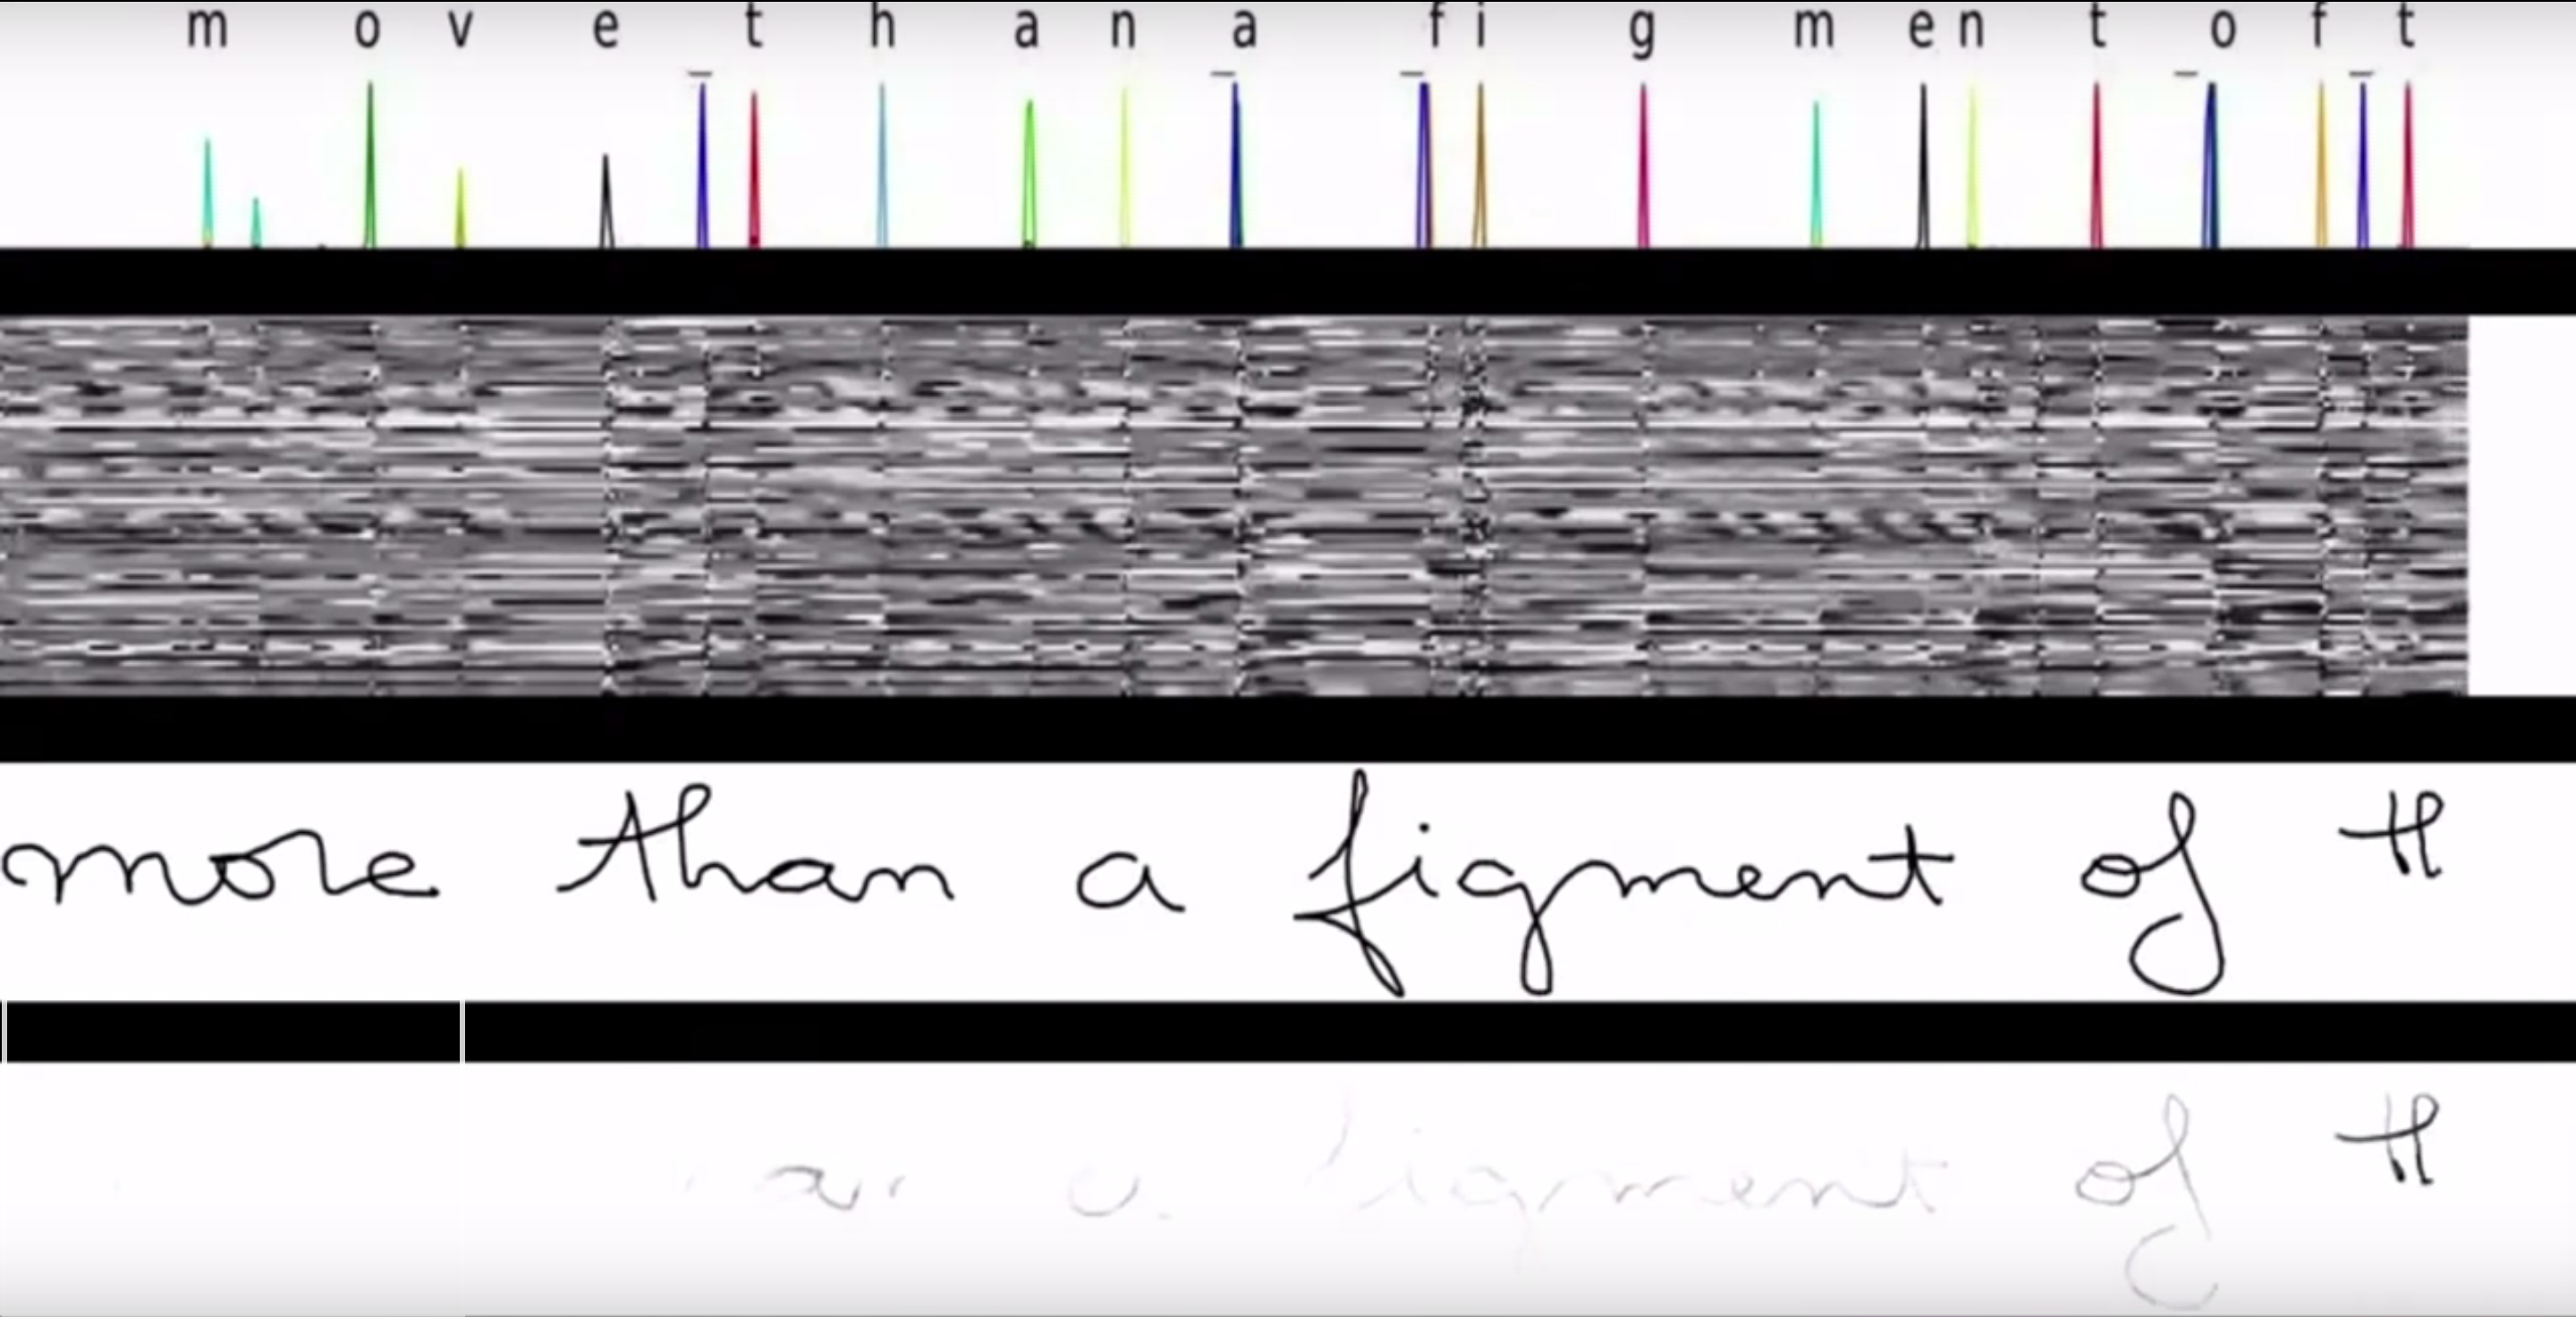 Example of an RNN's output for recognizing characters in handwritten characters. The model scans along one slice at a time of the data and the output is character likelihood. Still from [youtube video](https://www.youtube.com/watch?v=mLxsbWAYIpw) by Nikhil Buduma.